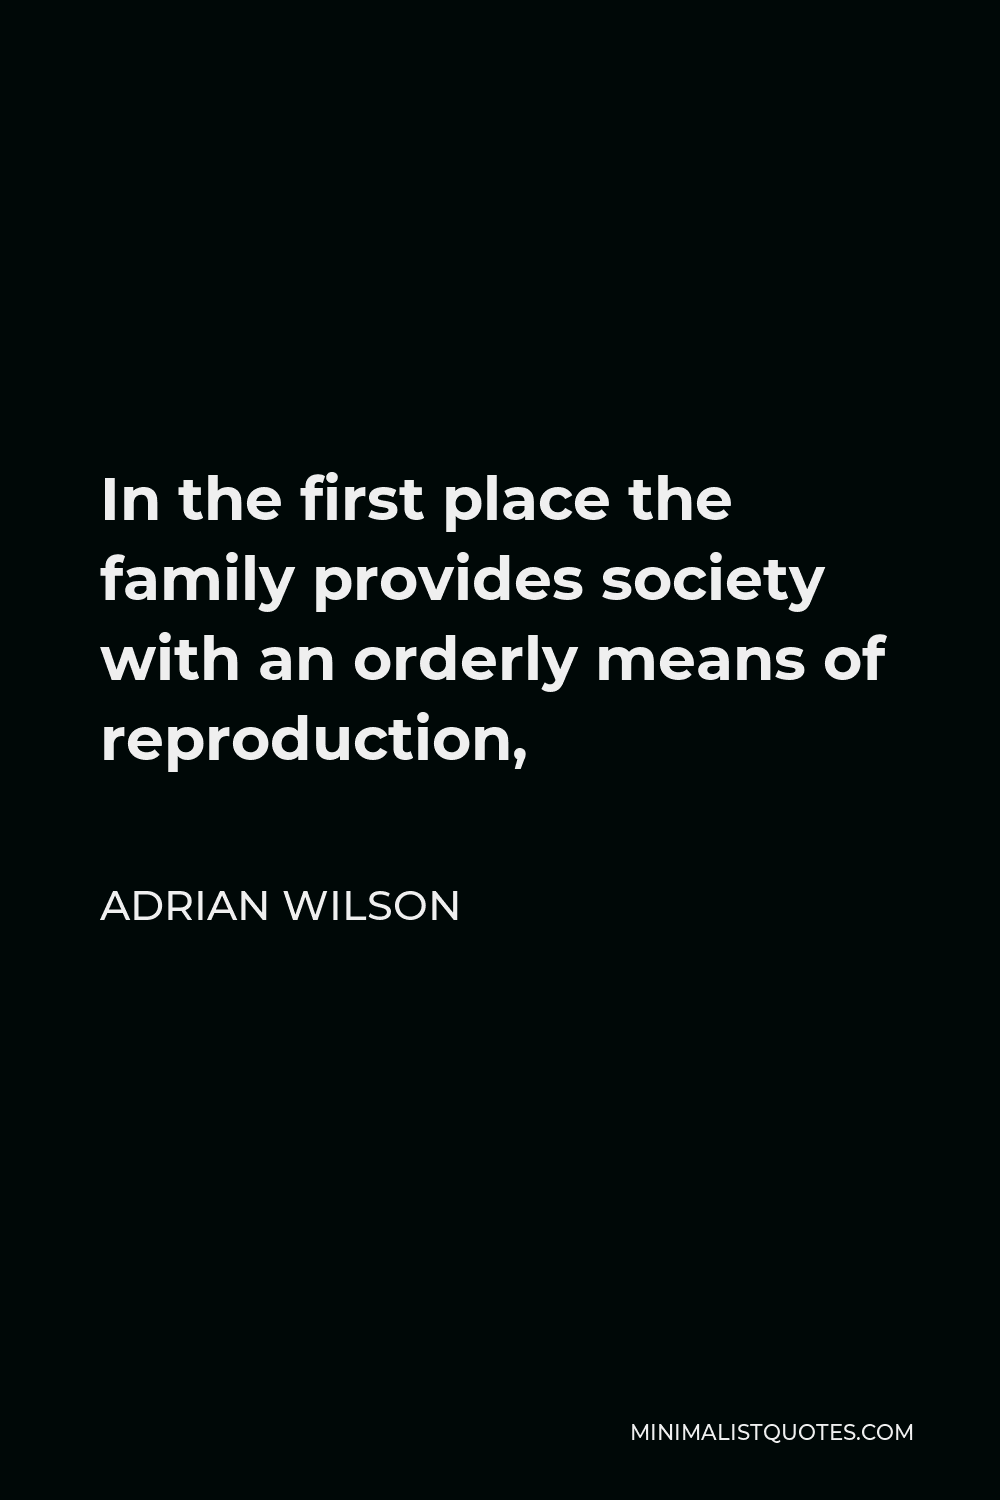 Adrian Wilson Quote - In the first place the family provides society with an orderly means of reproduction,